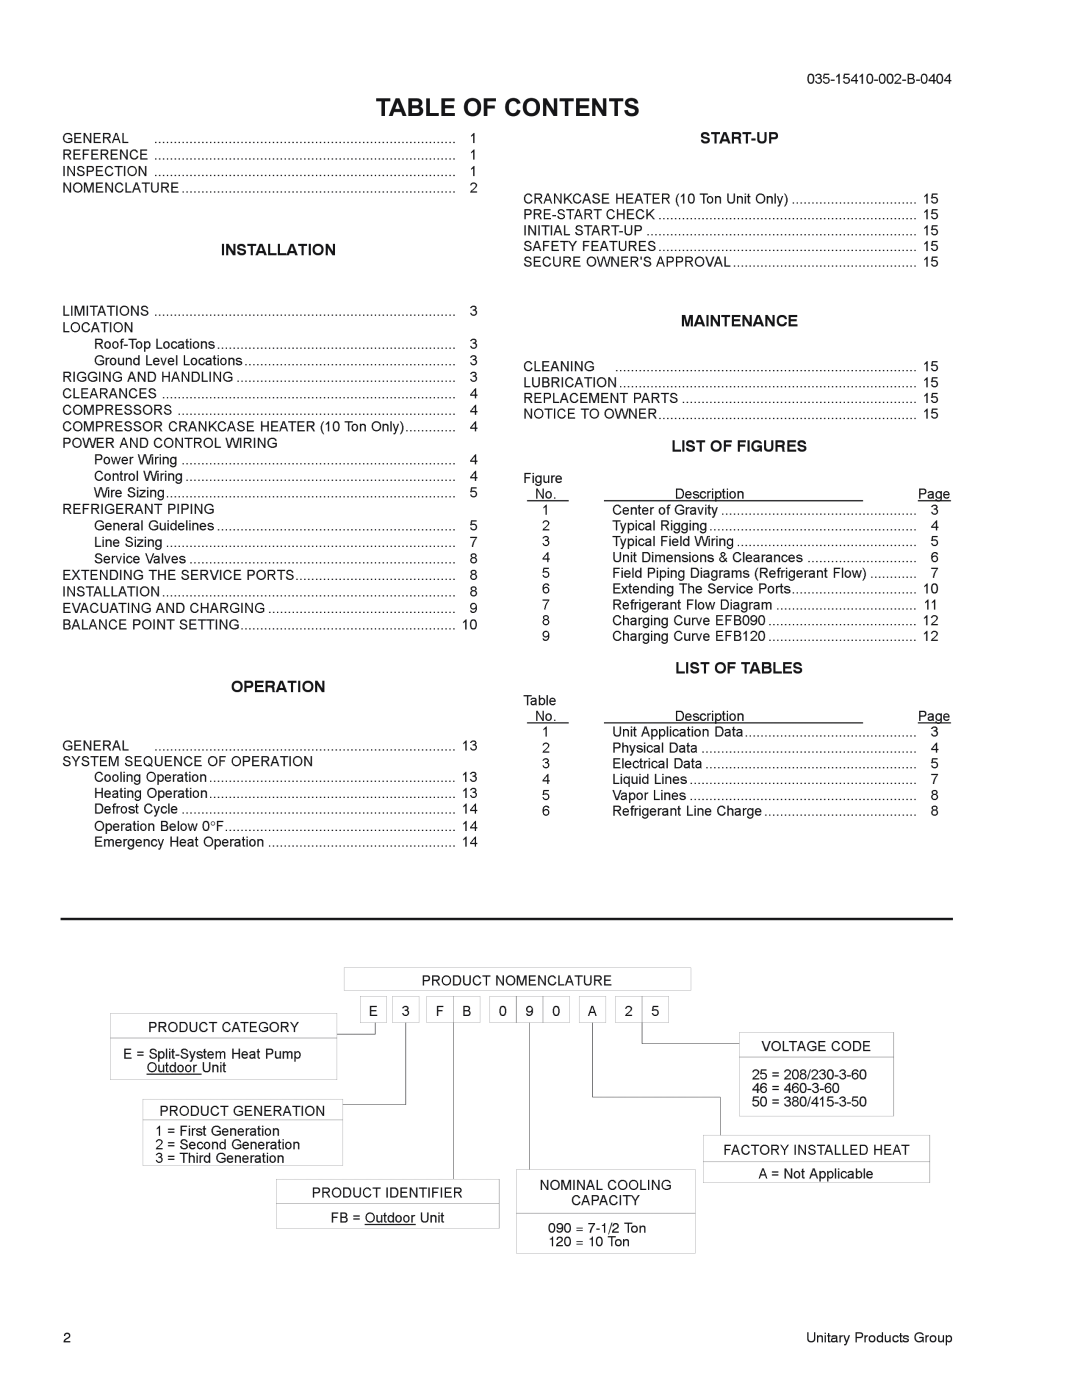 York E2FB120, E3FB090 Table Of Contents, Start-Up Installation Maintenance List Of Figures, List Of Tables Operation 